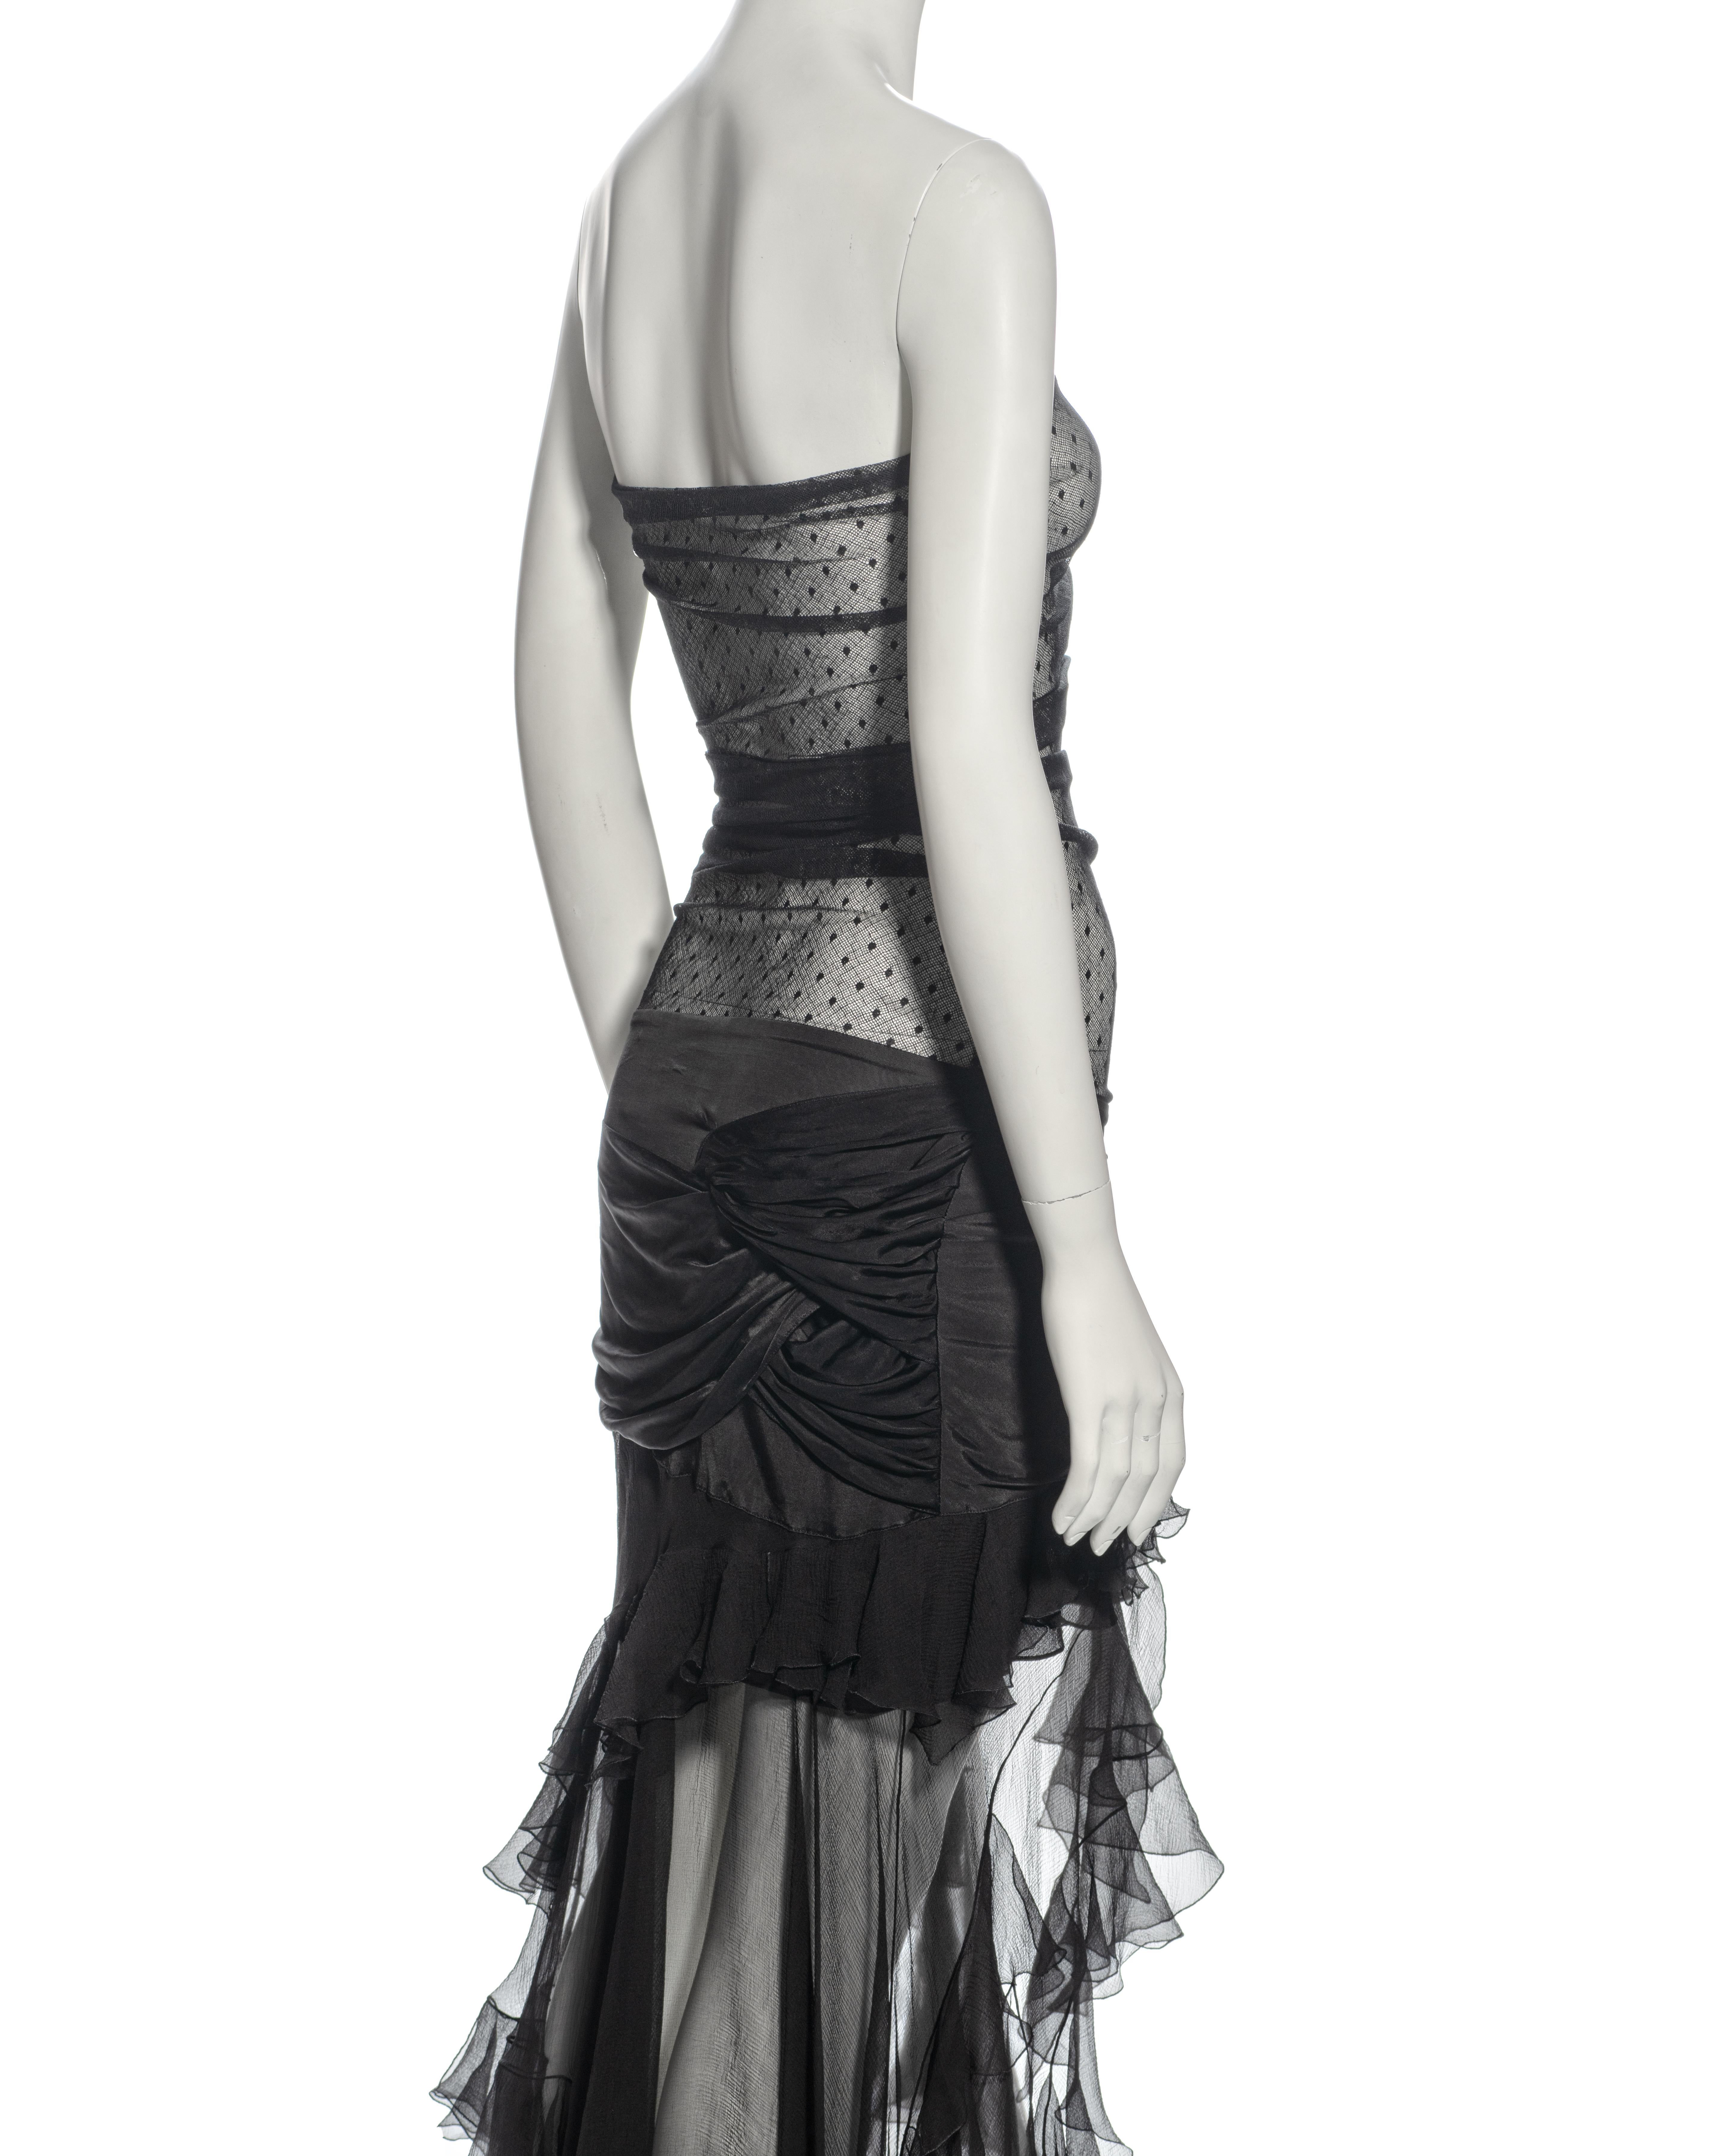 Christian Dior by John Galliano Black Strapless Silk and Mesh Dress, ss 2004 For Sale 6